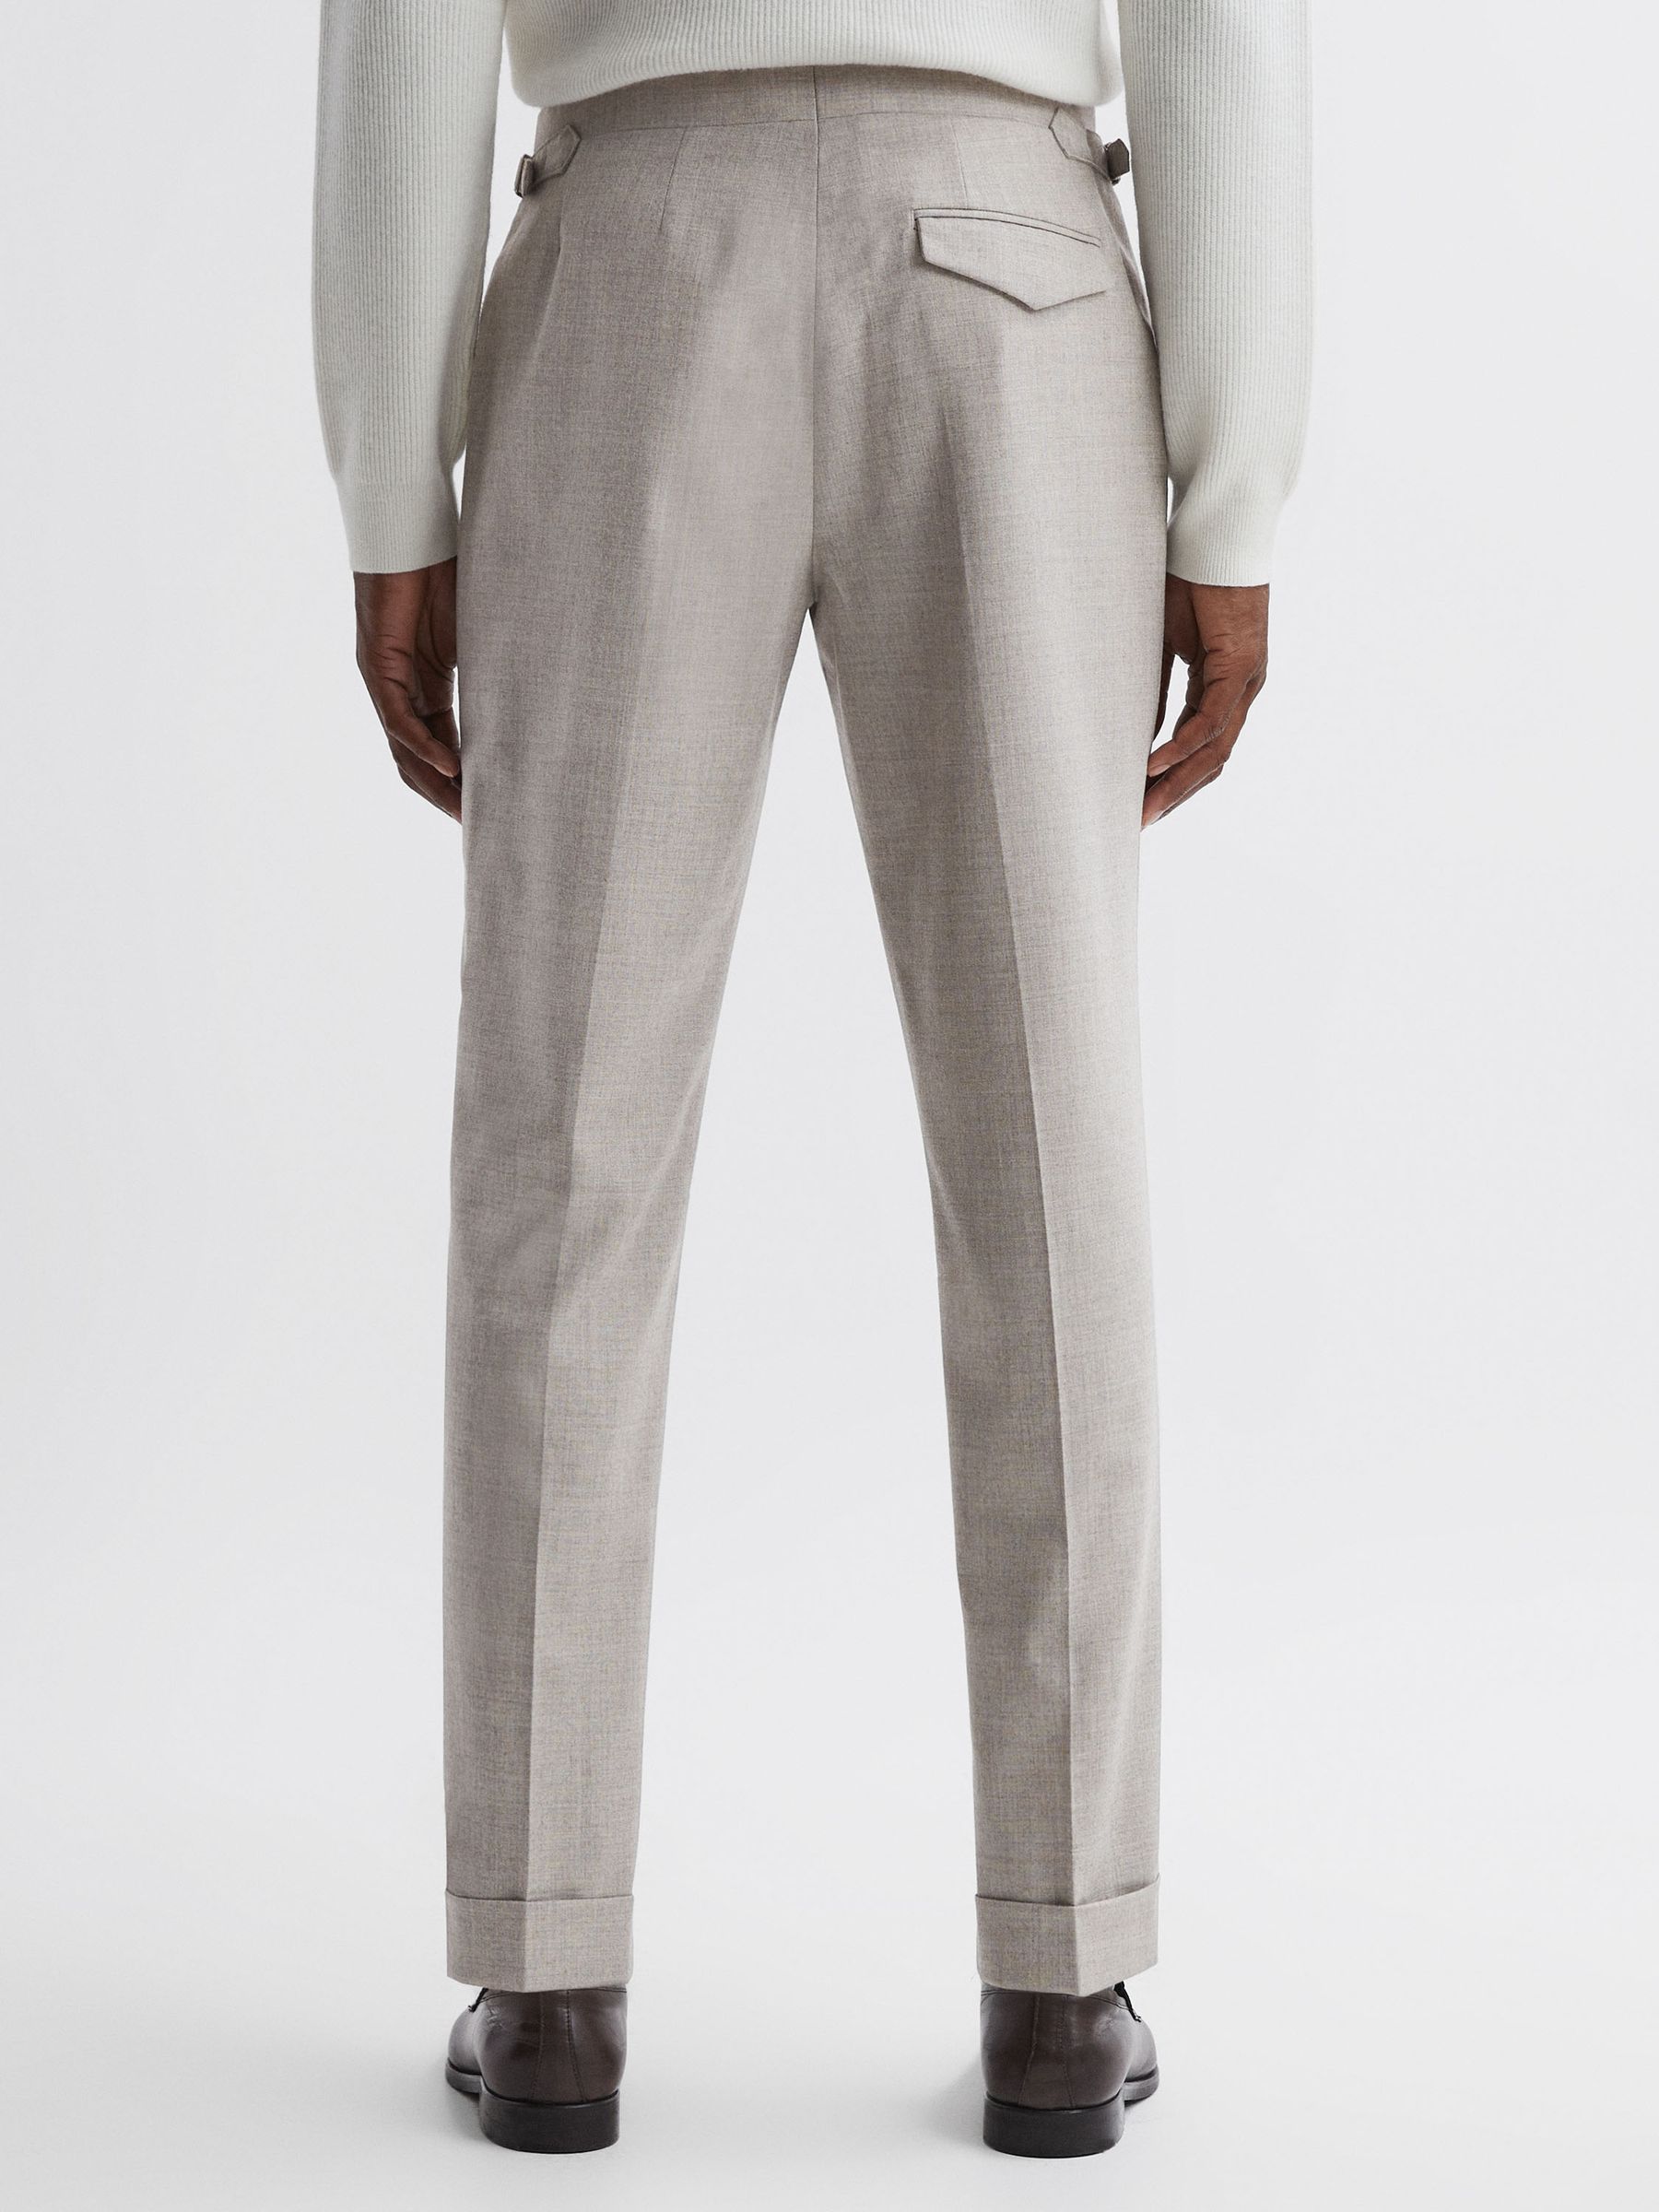 Reiss Beadnell Slim Fit Brushed Wool Trousers - REISS